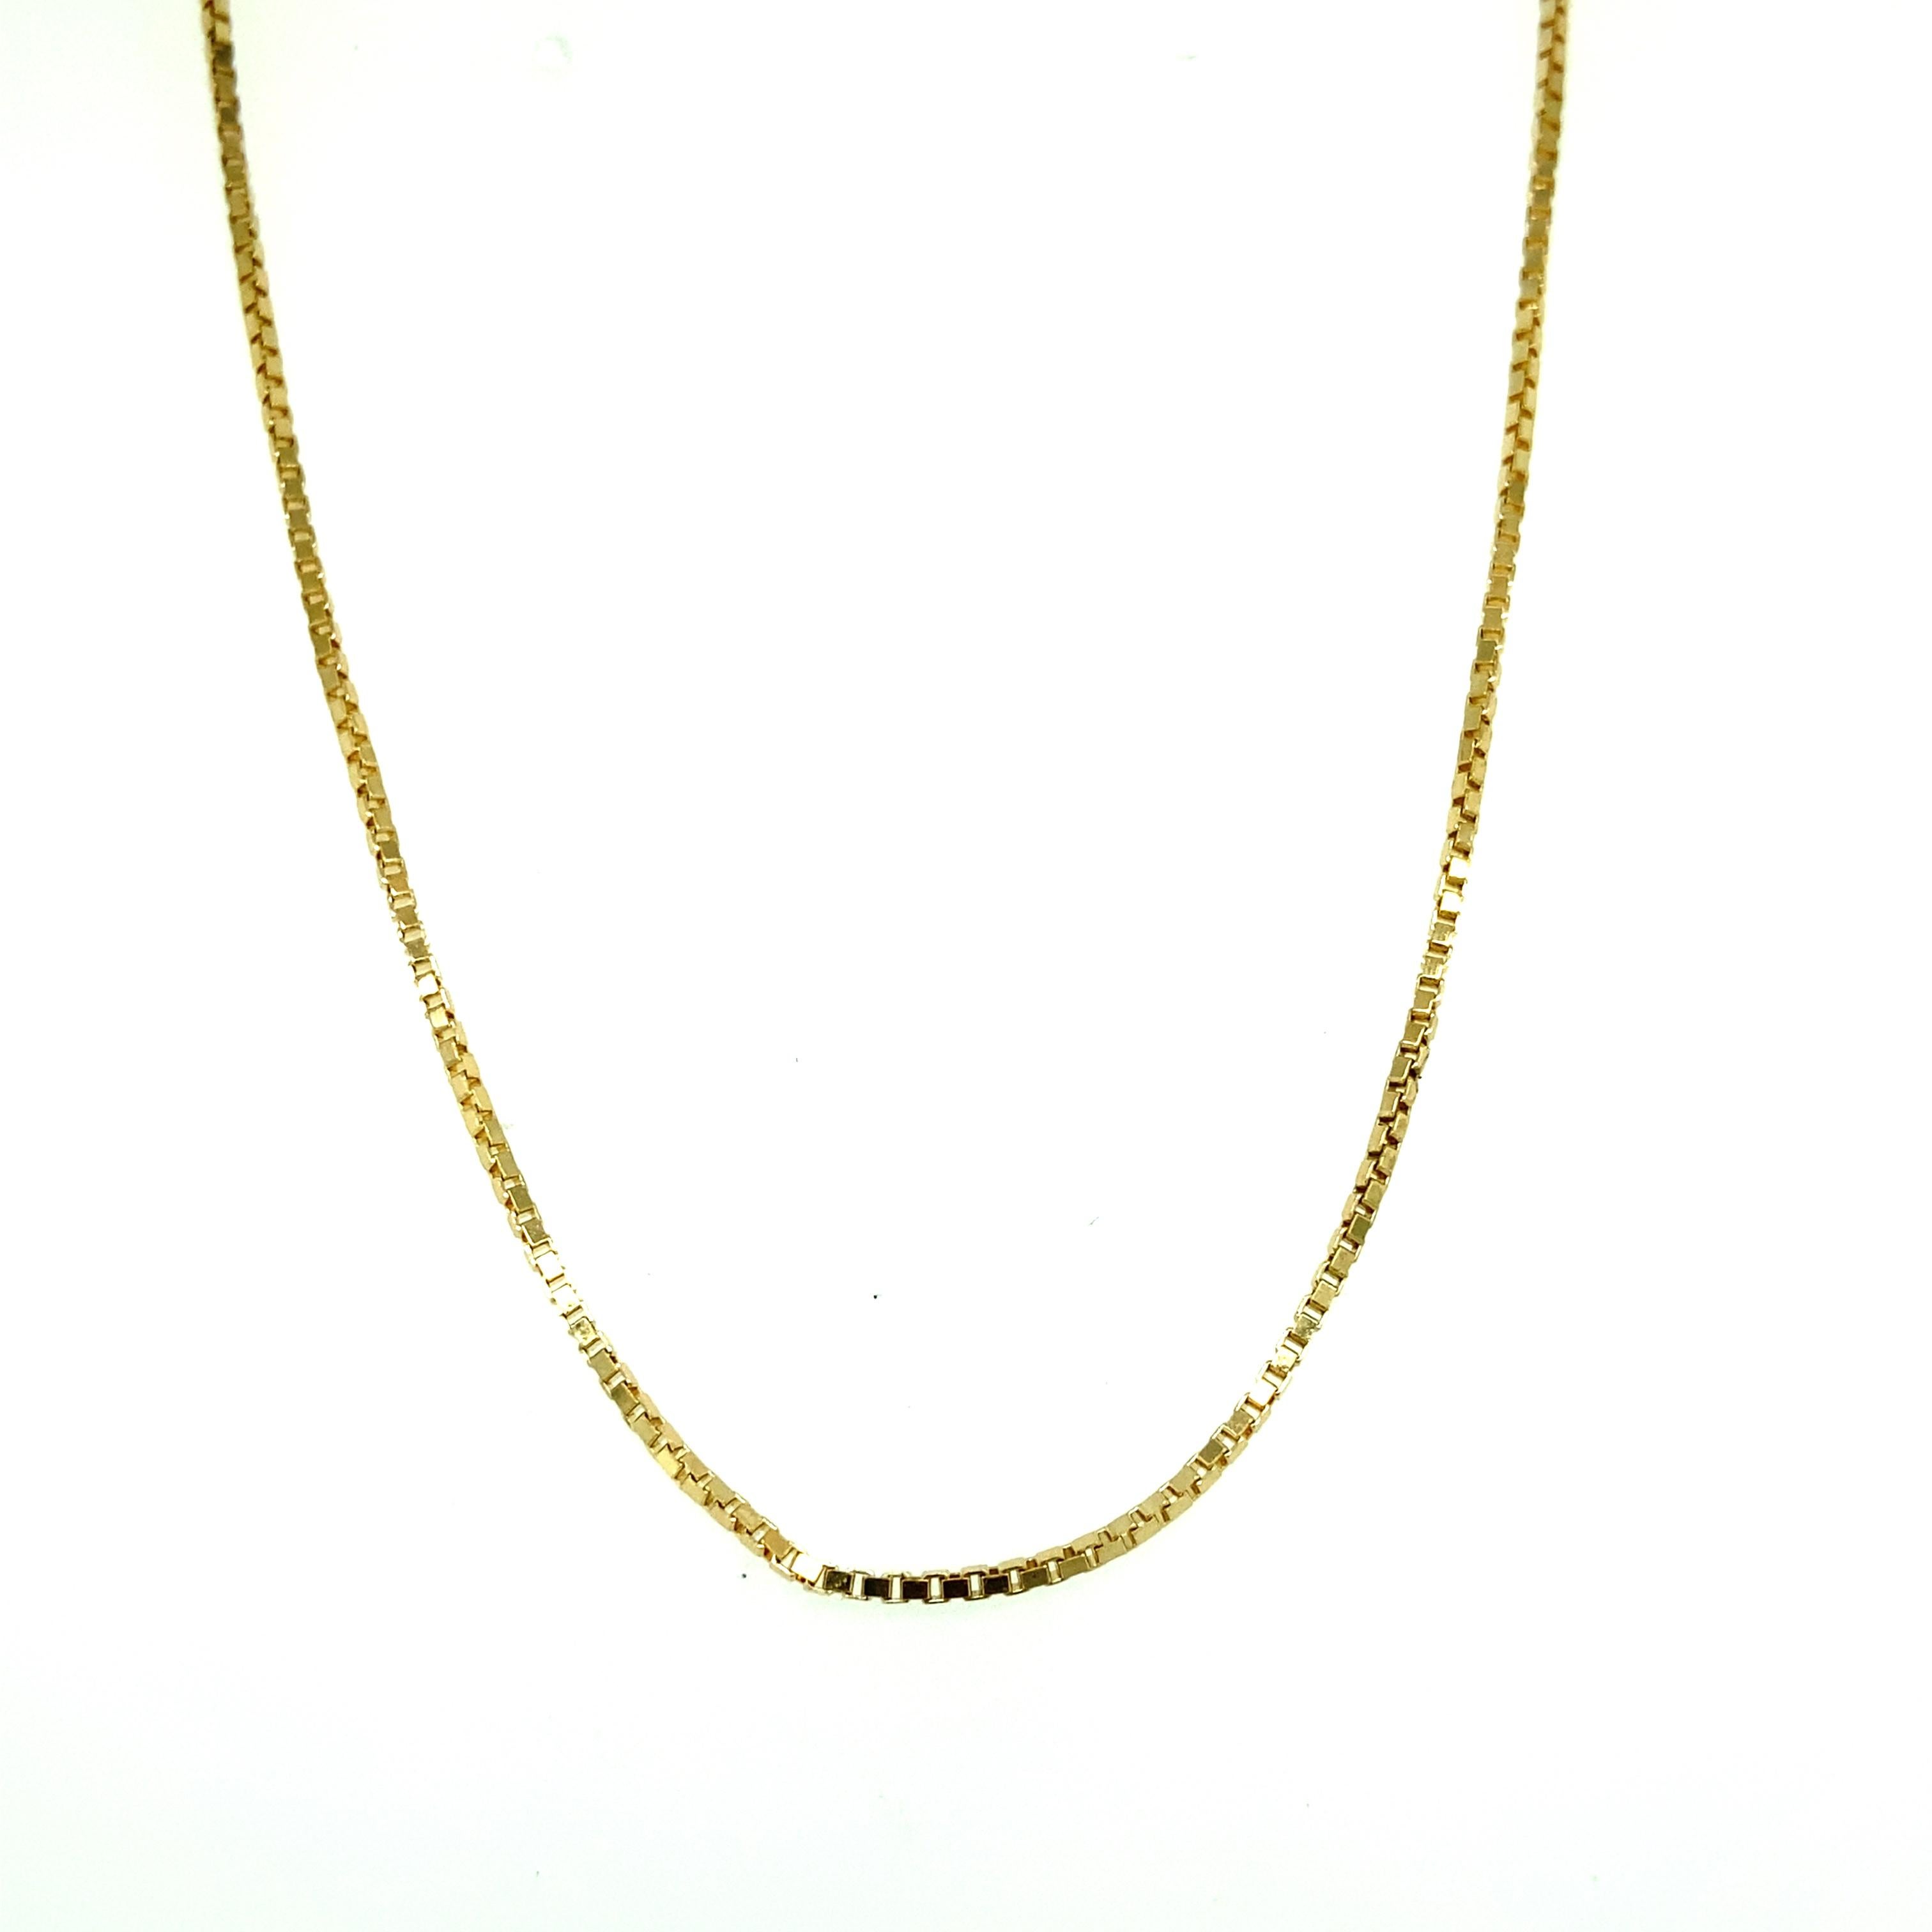 One 14 karat yellow gold box link chain measuring 24 inches long complete with a spring ring clasp.  